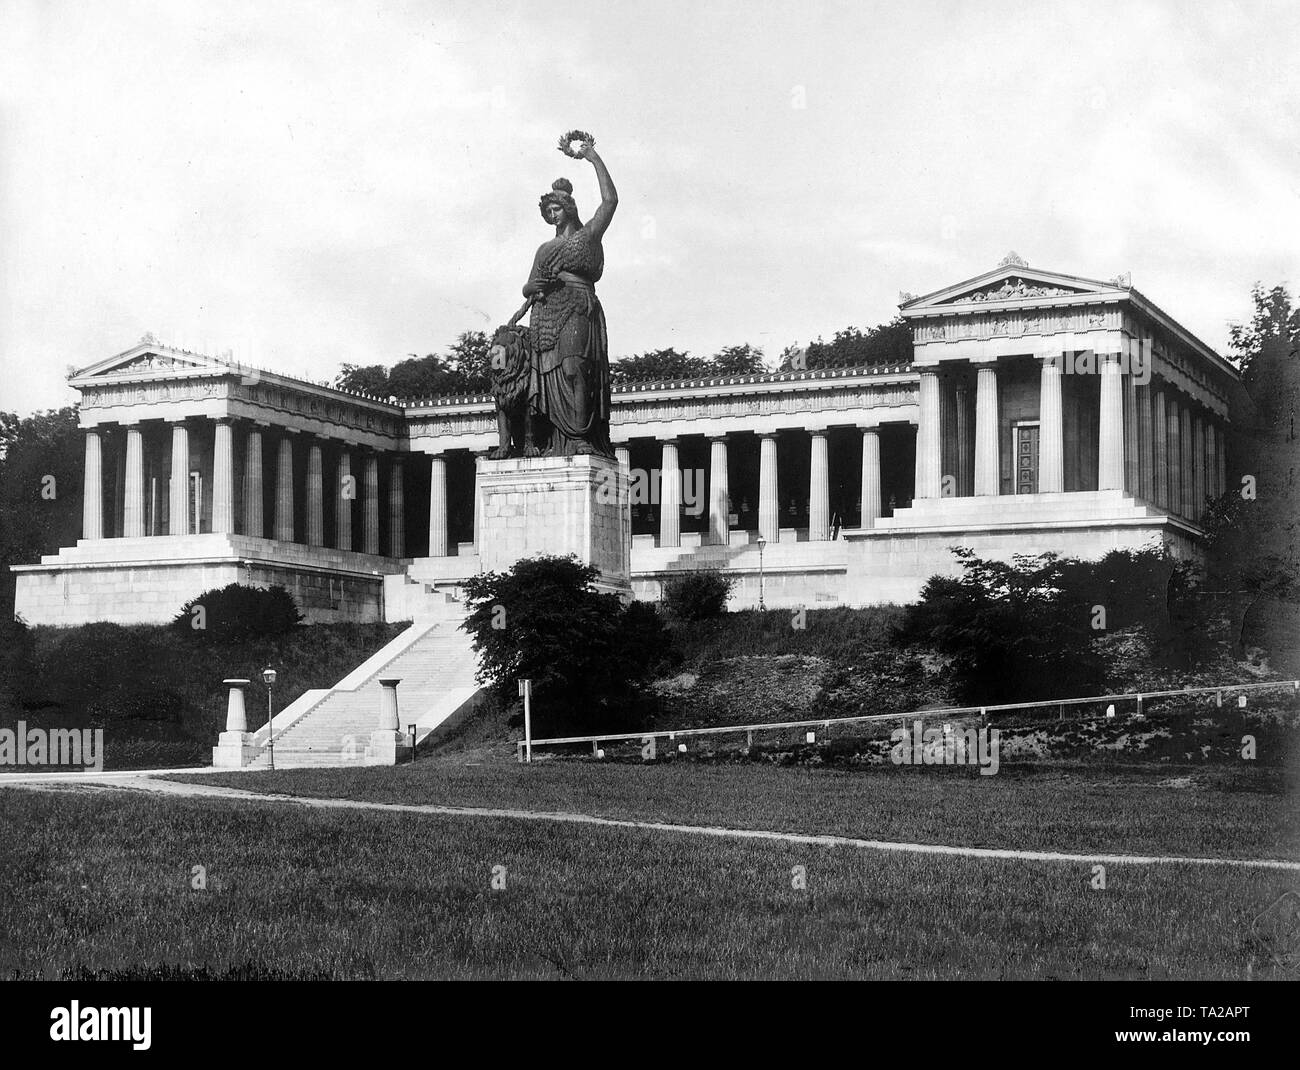 The Bavaria statue and the Ruhmeshalle (Hall of Fame) in Munich. Stock Photo